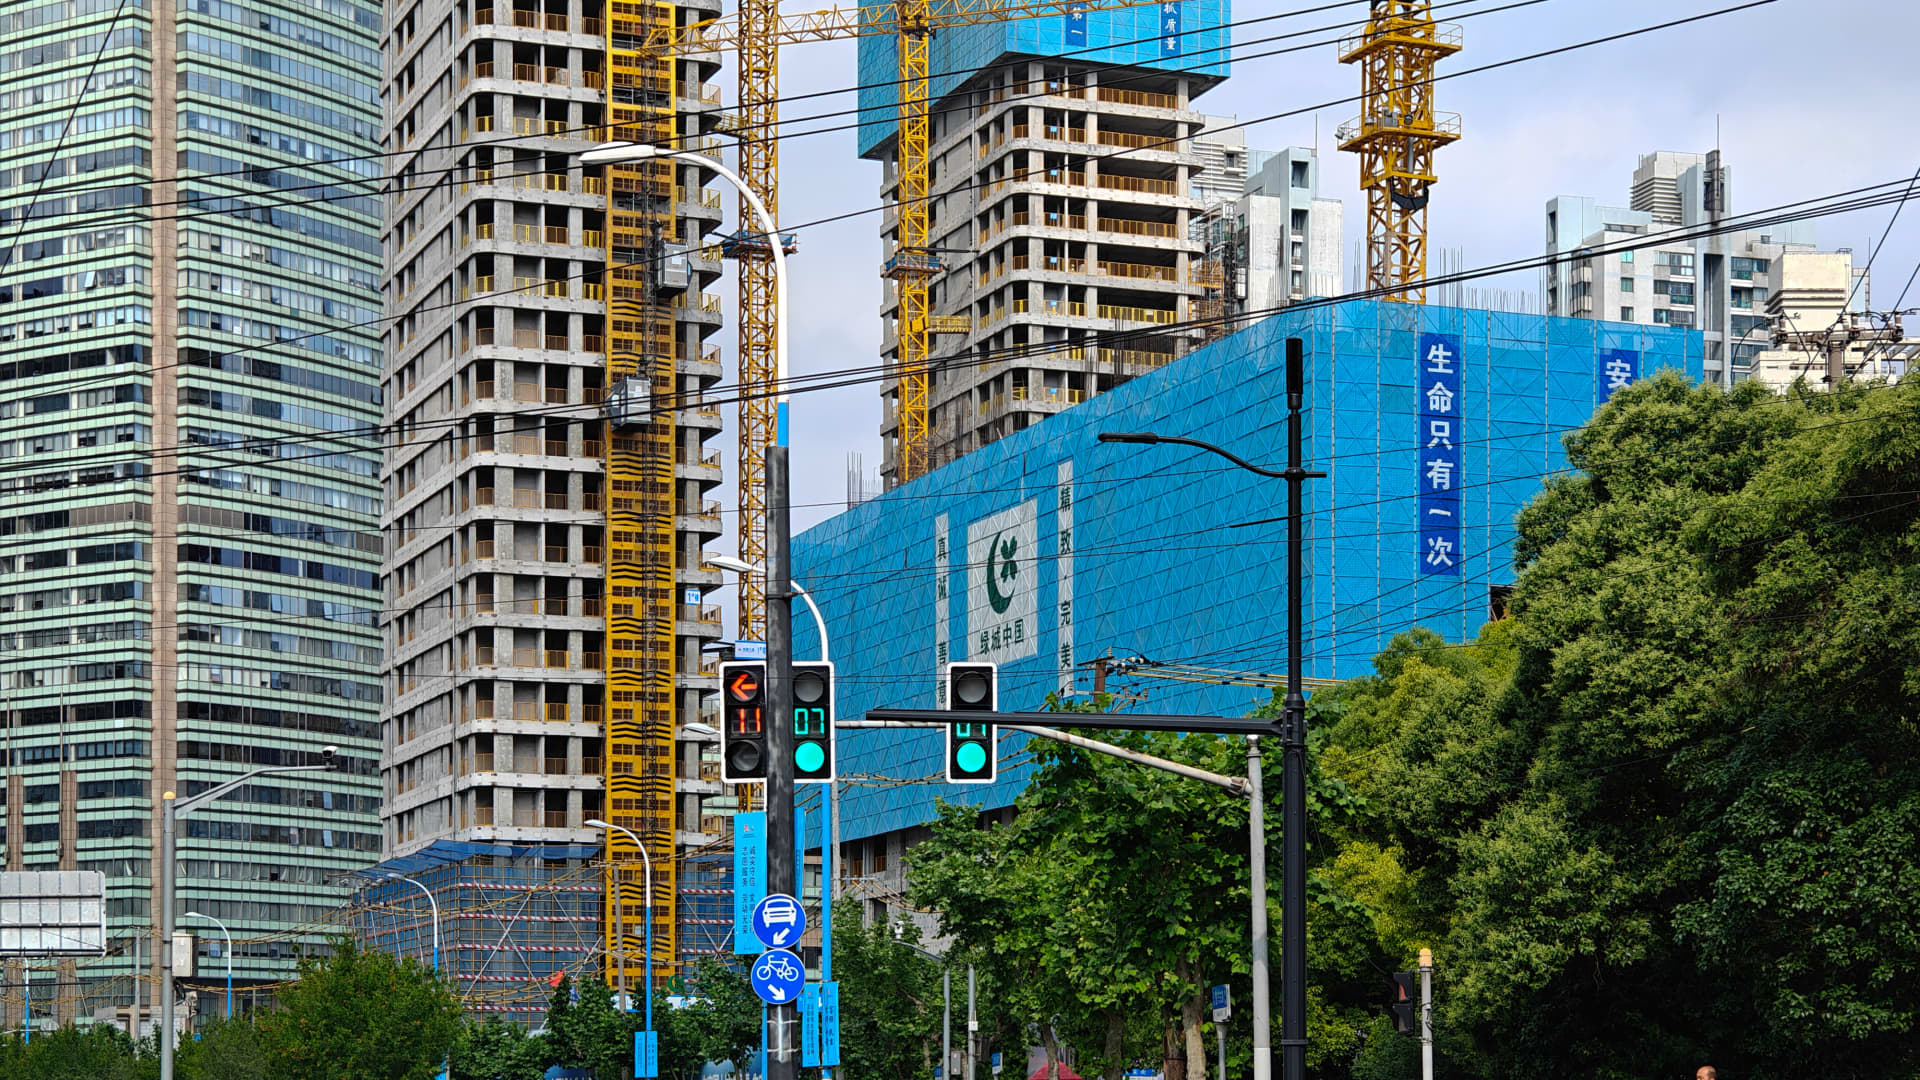 New warning signs emerge for China’s property market